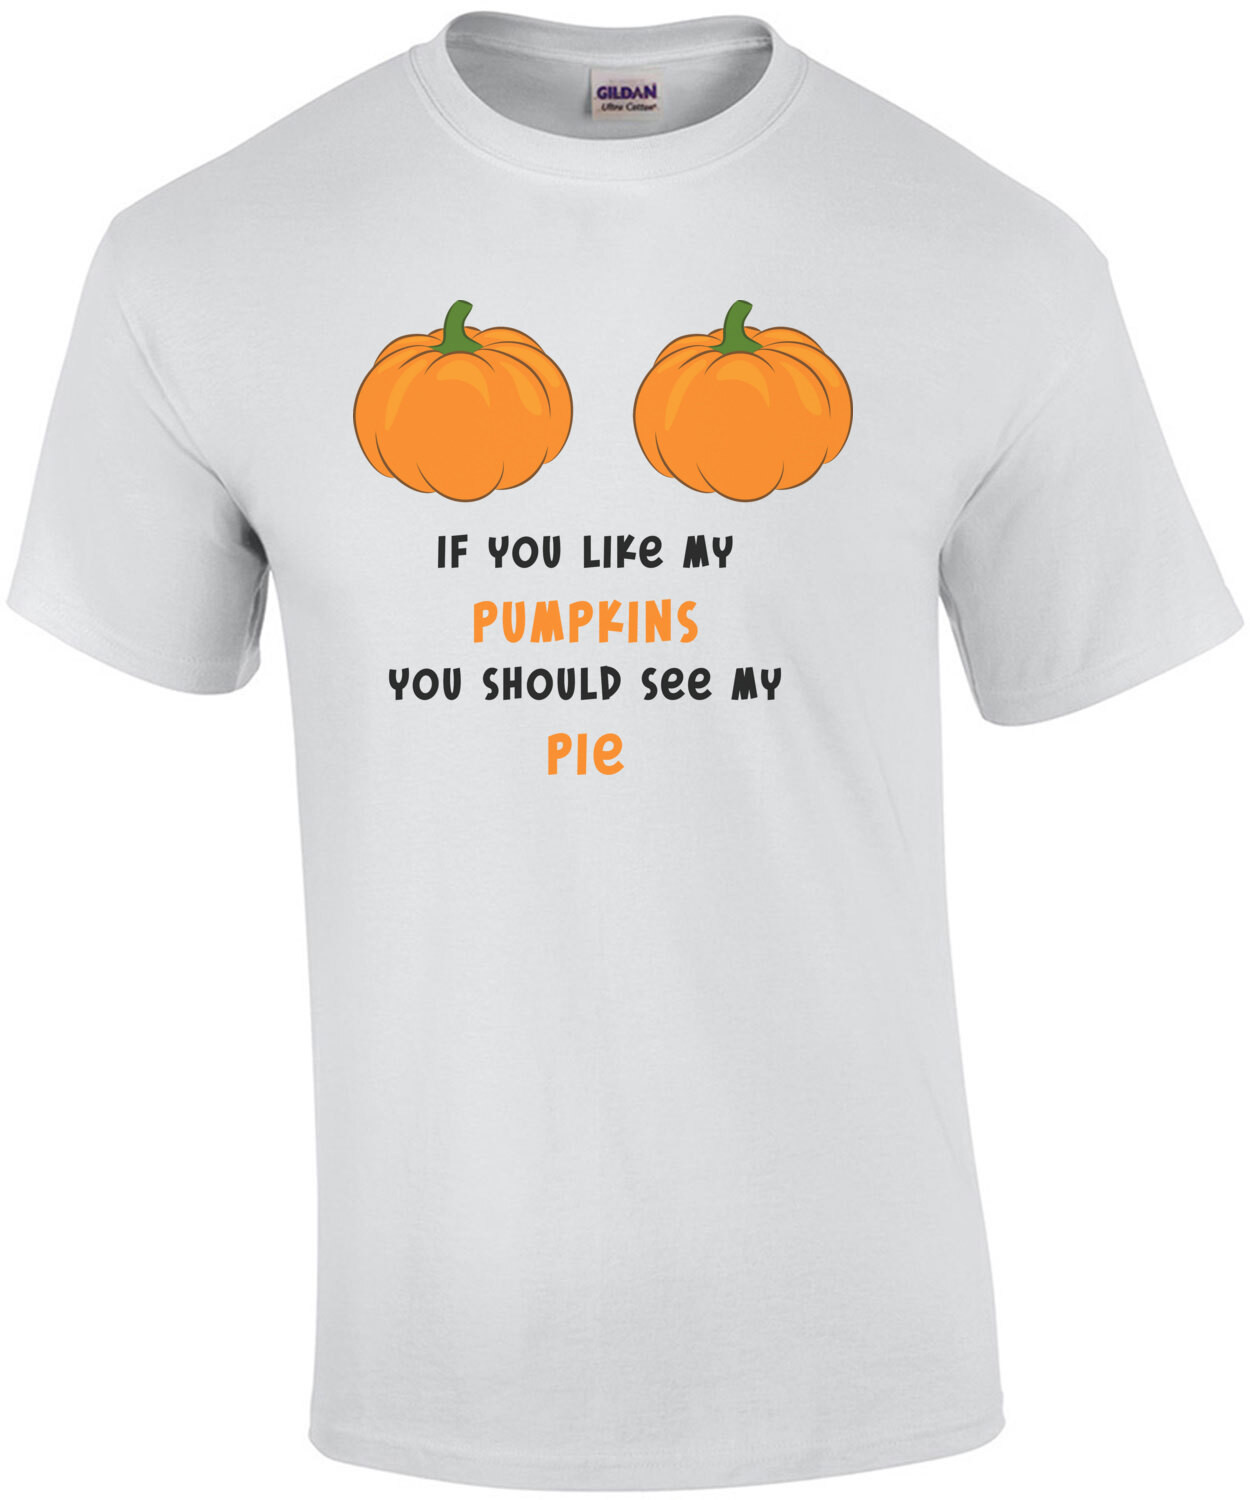 If you like my pumpkins, you should see my pie!  Funny ladies halloween shirt